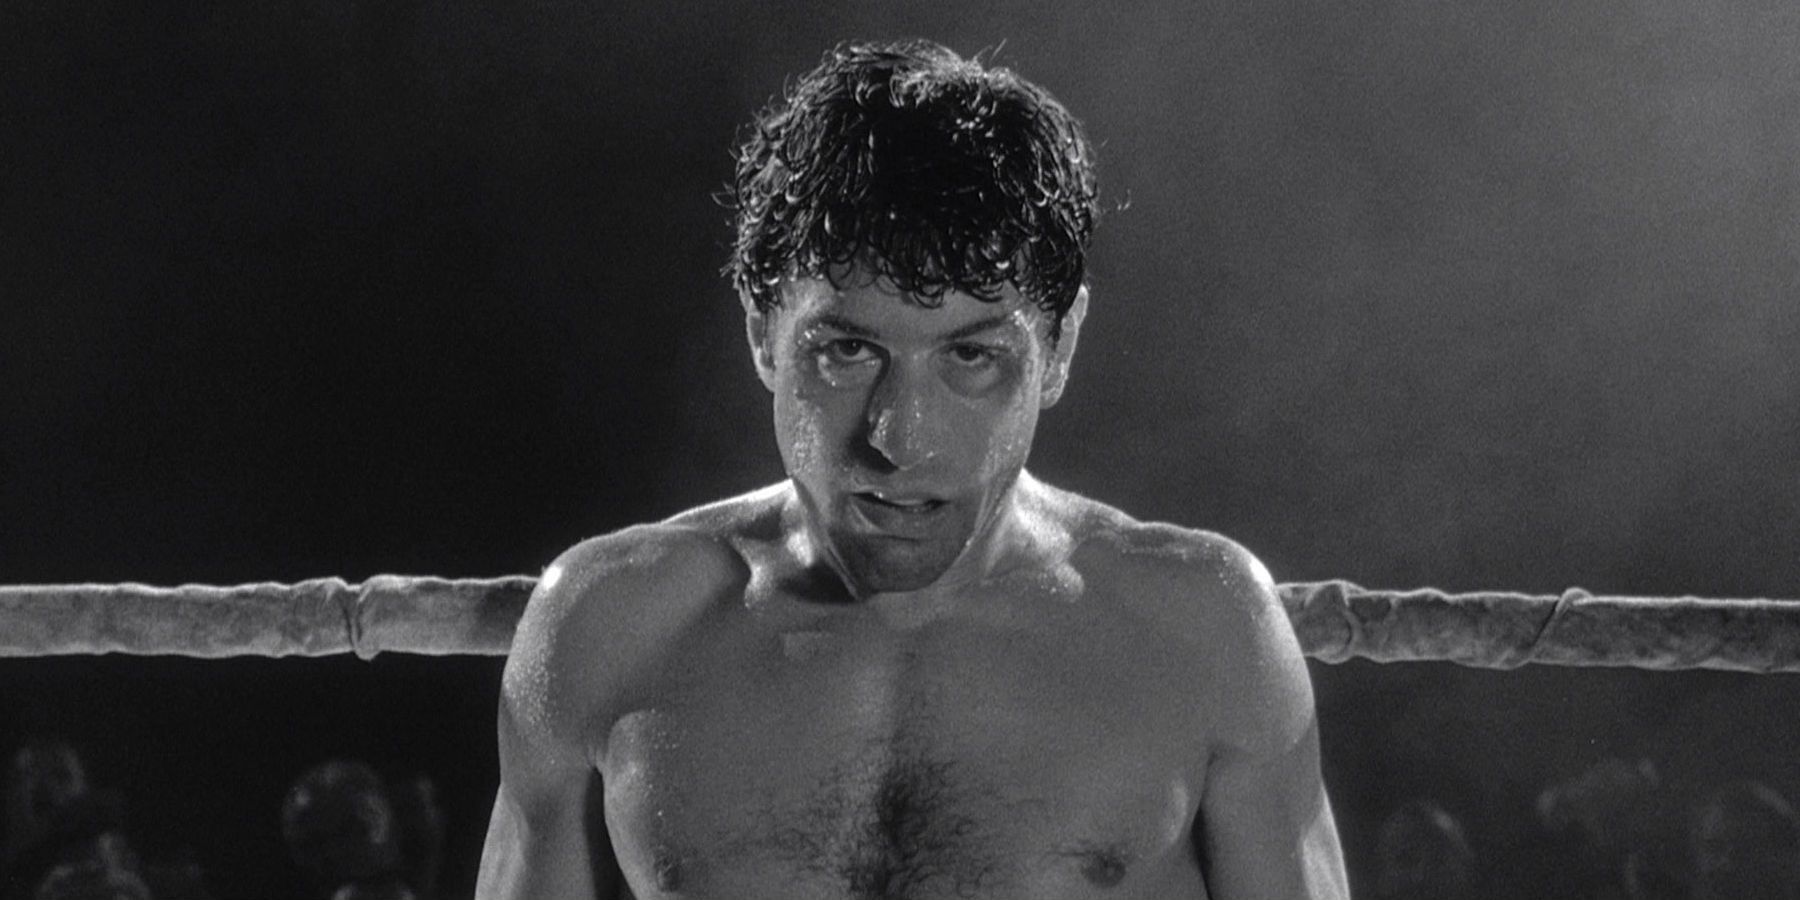 Raging Bull 10 Most Iconic Moments Ranked